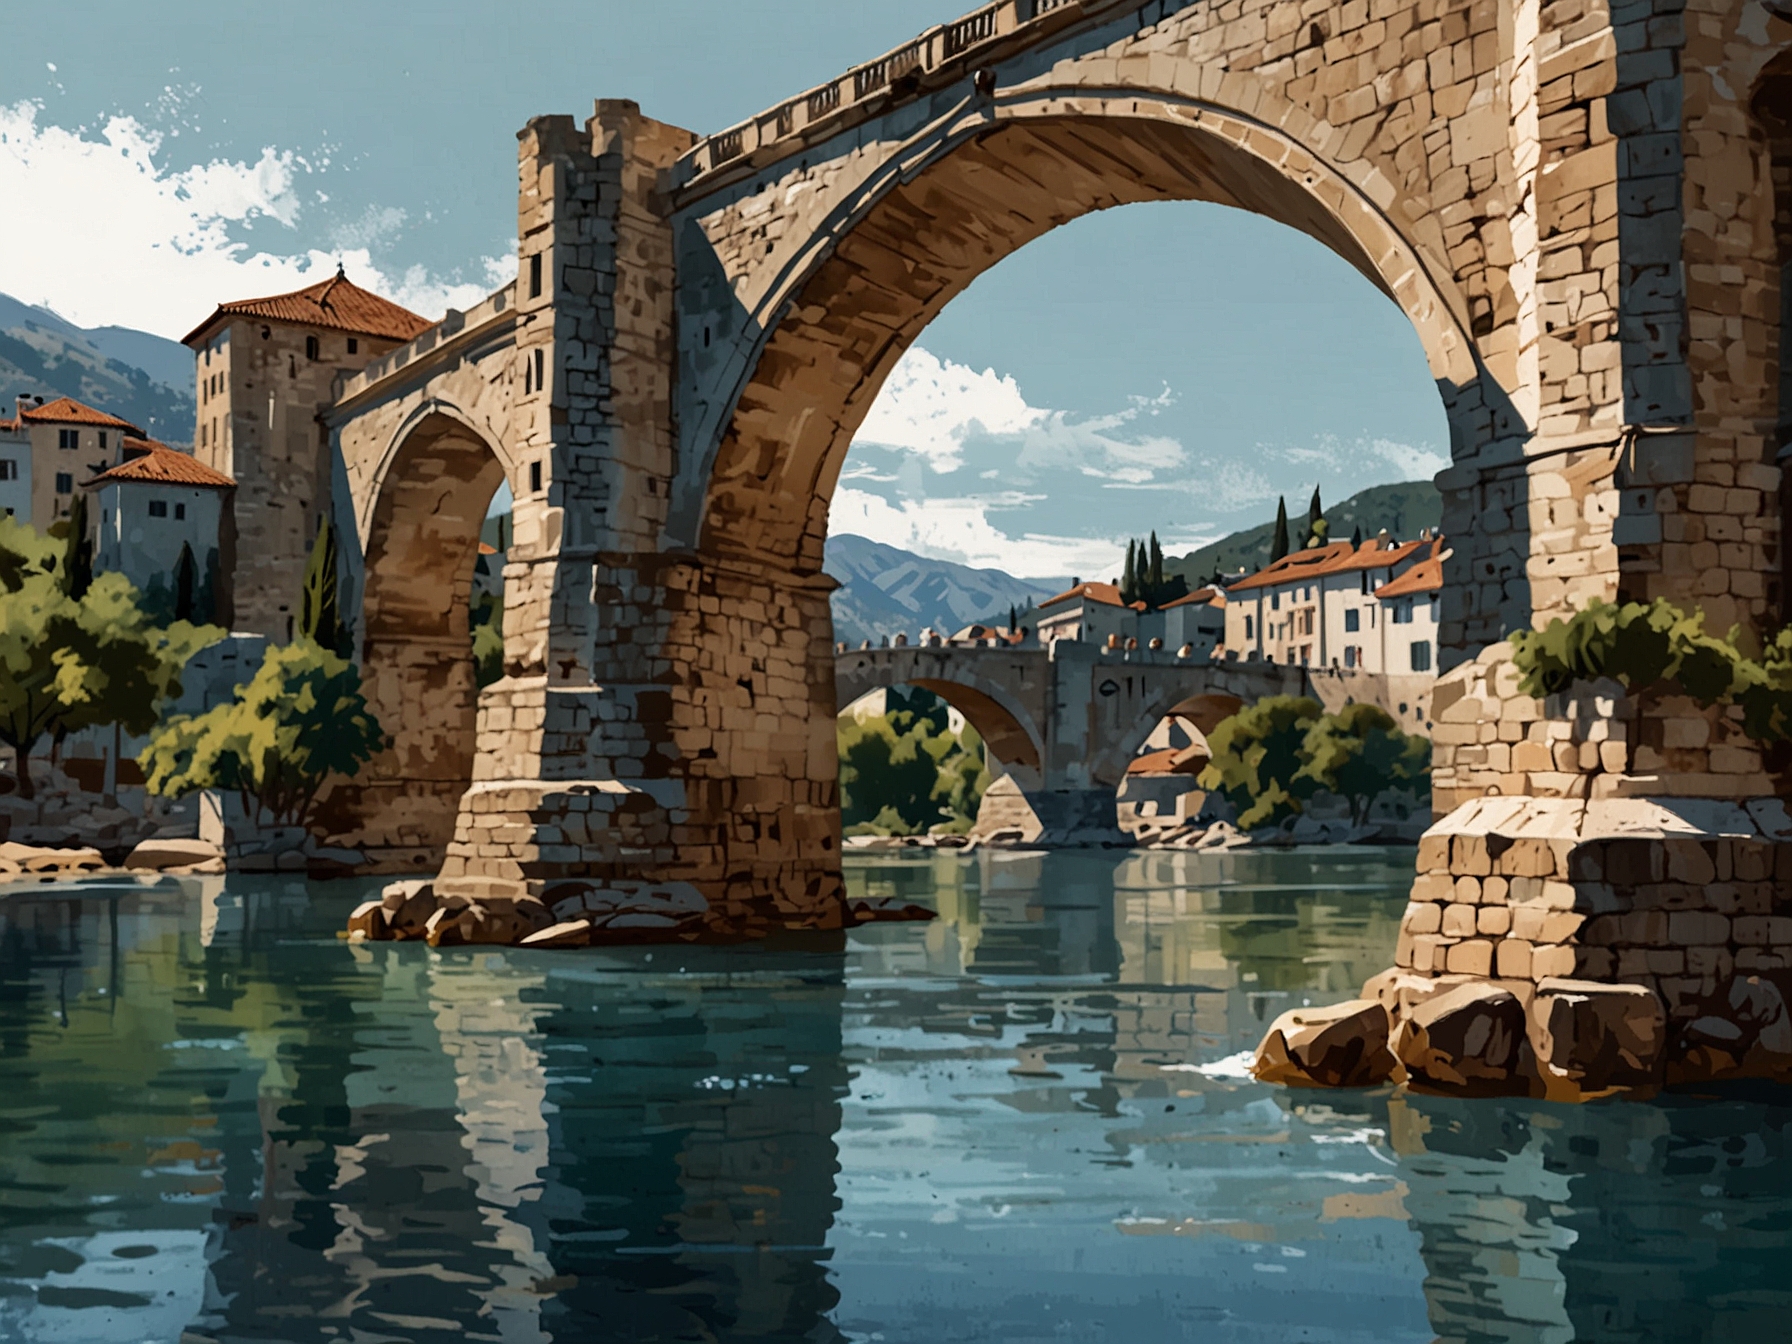 A stunning view of Stari Most arches elegantly over the Neretva River, reflecting in its serene waters during a clear day. Tourists gather around, captivated by its historic charm.